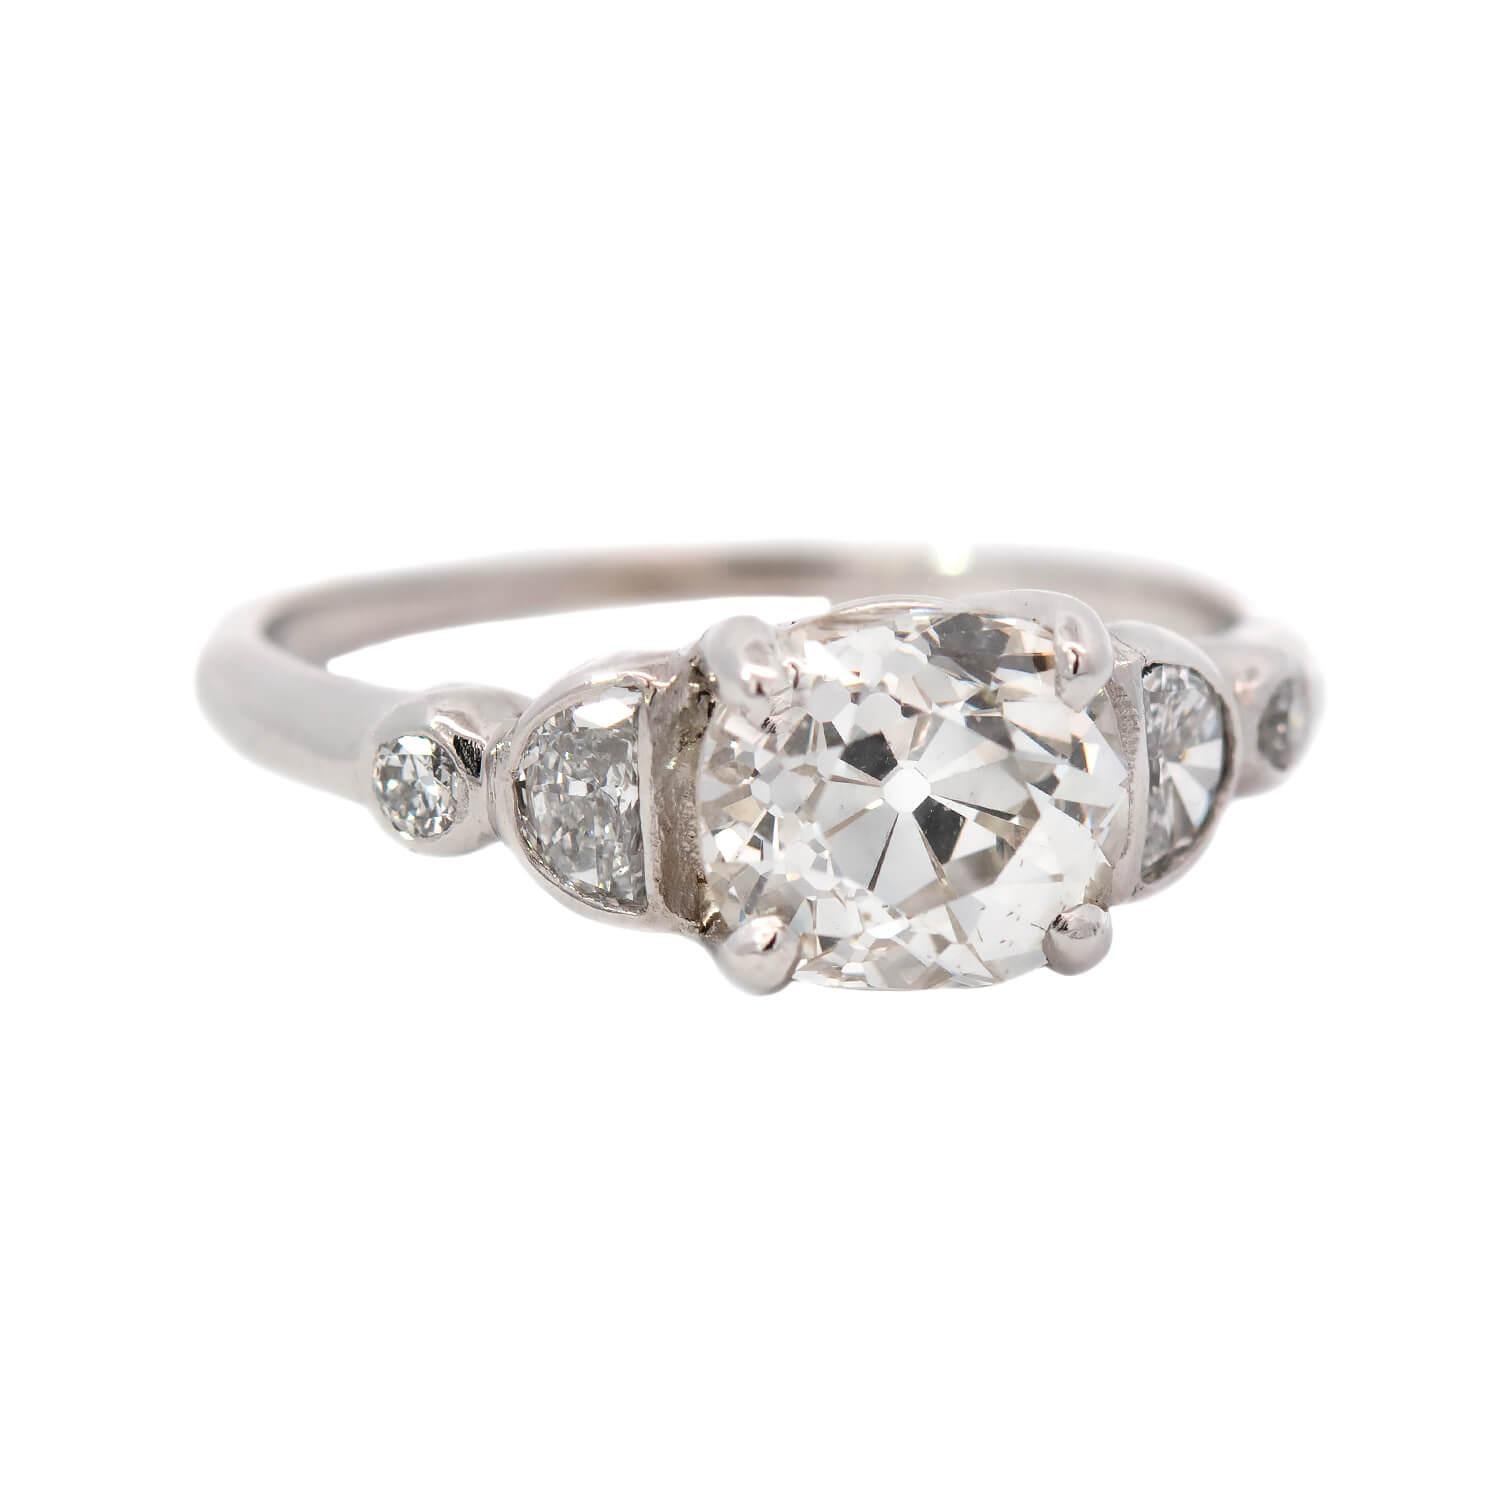 A stunning diamond engagement ring from the Art Deco (ca1920) era! This beautiful ring is made of 14k white gold and features a dazzling old European Cut diamond in the center. The diamond, which is prong set, is resting in a simple basket-style